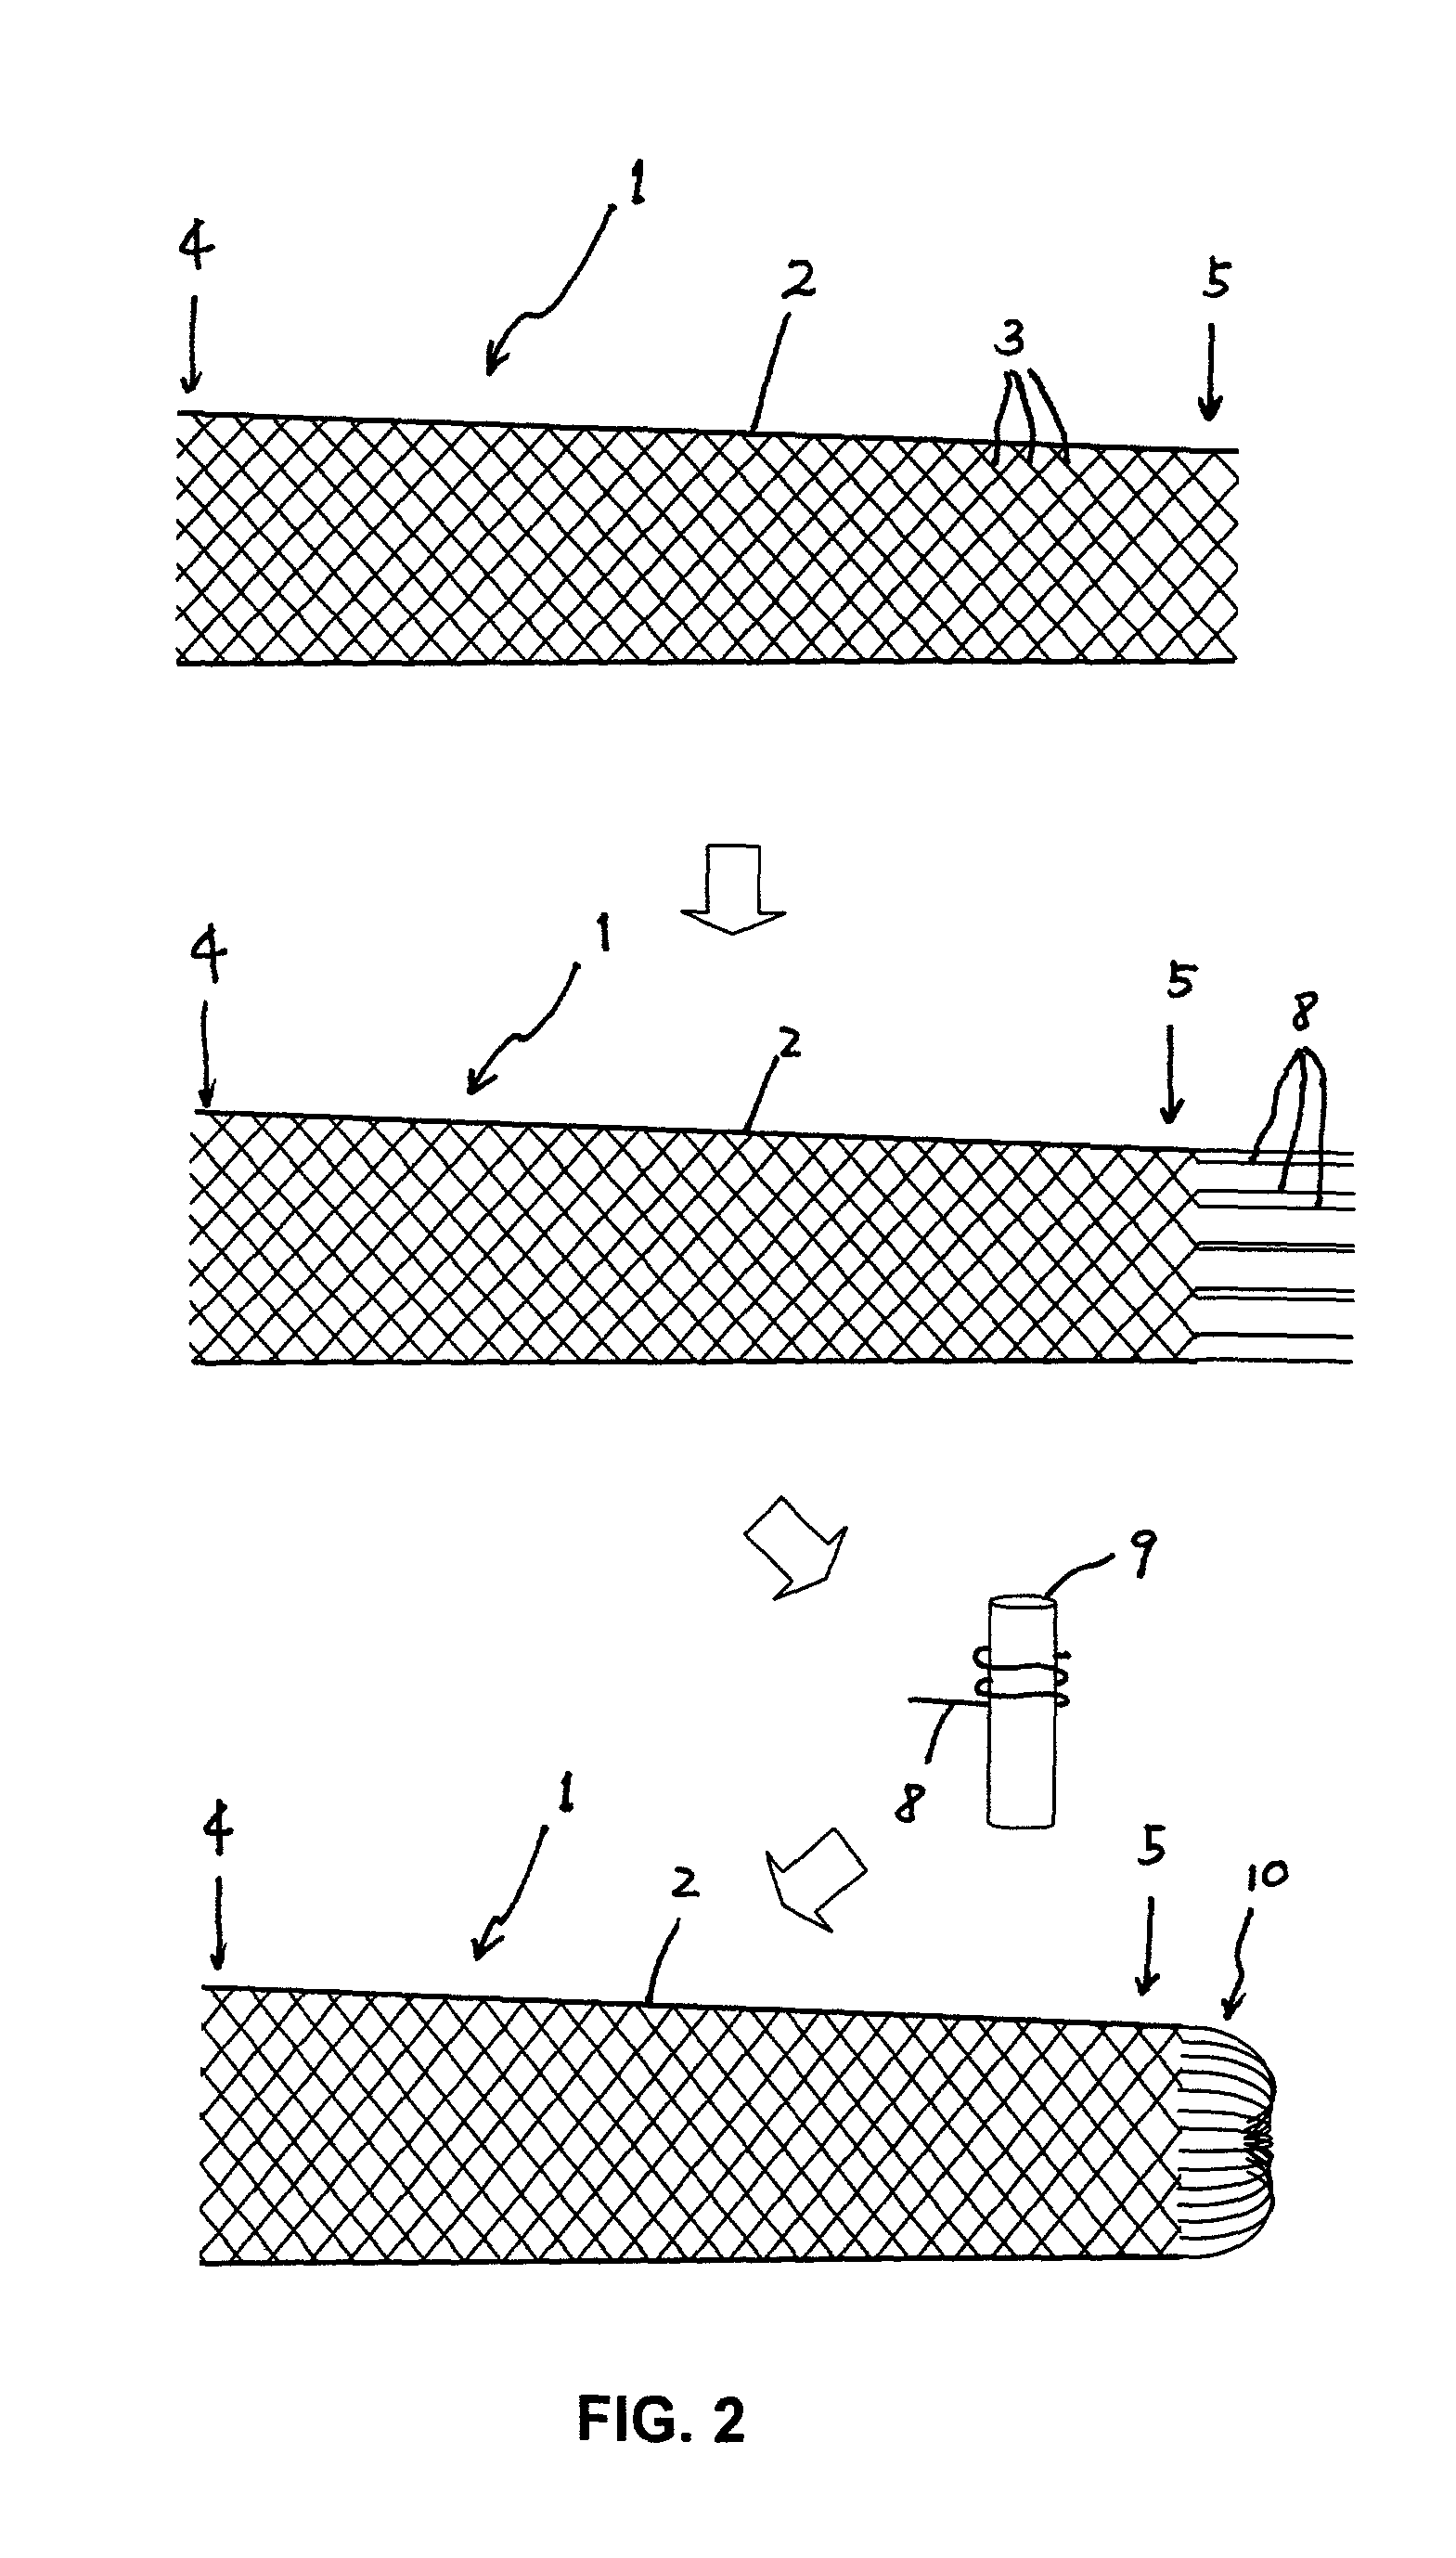 Medical stent with a valve and related methods of manufacturing